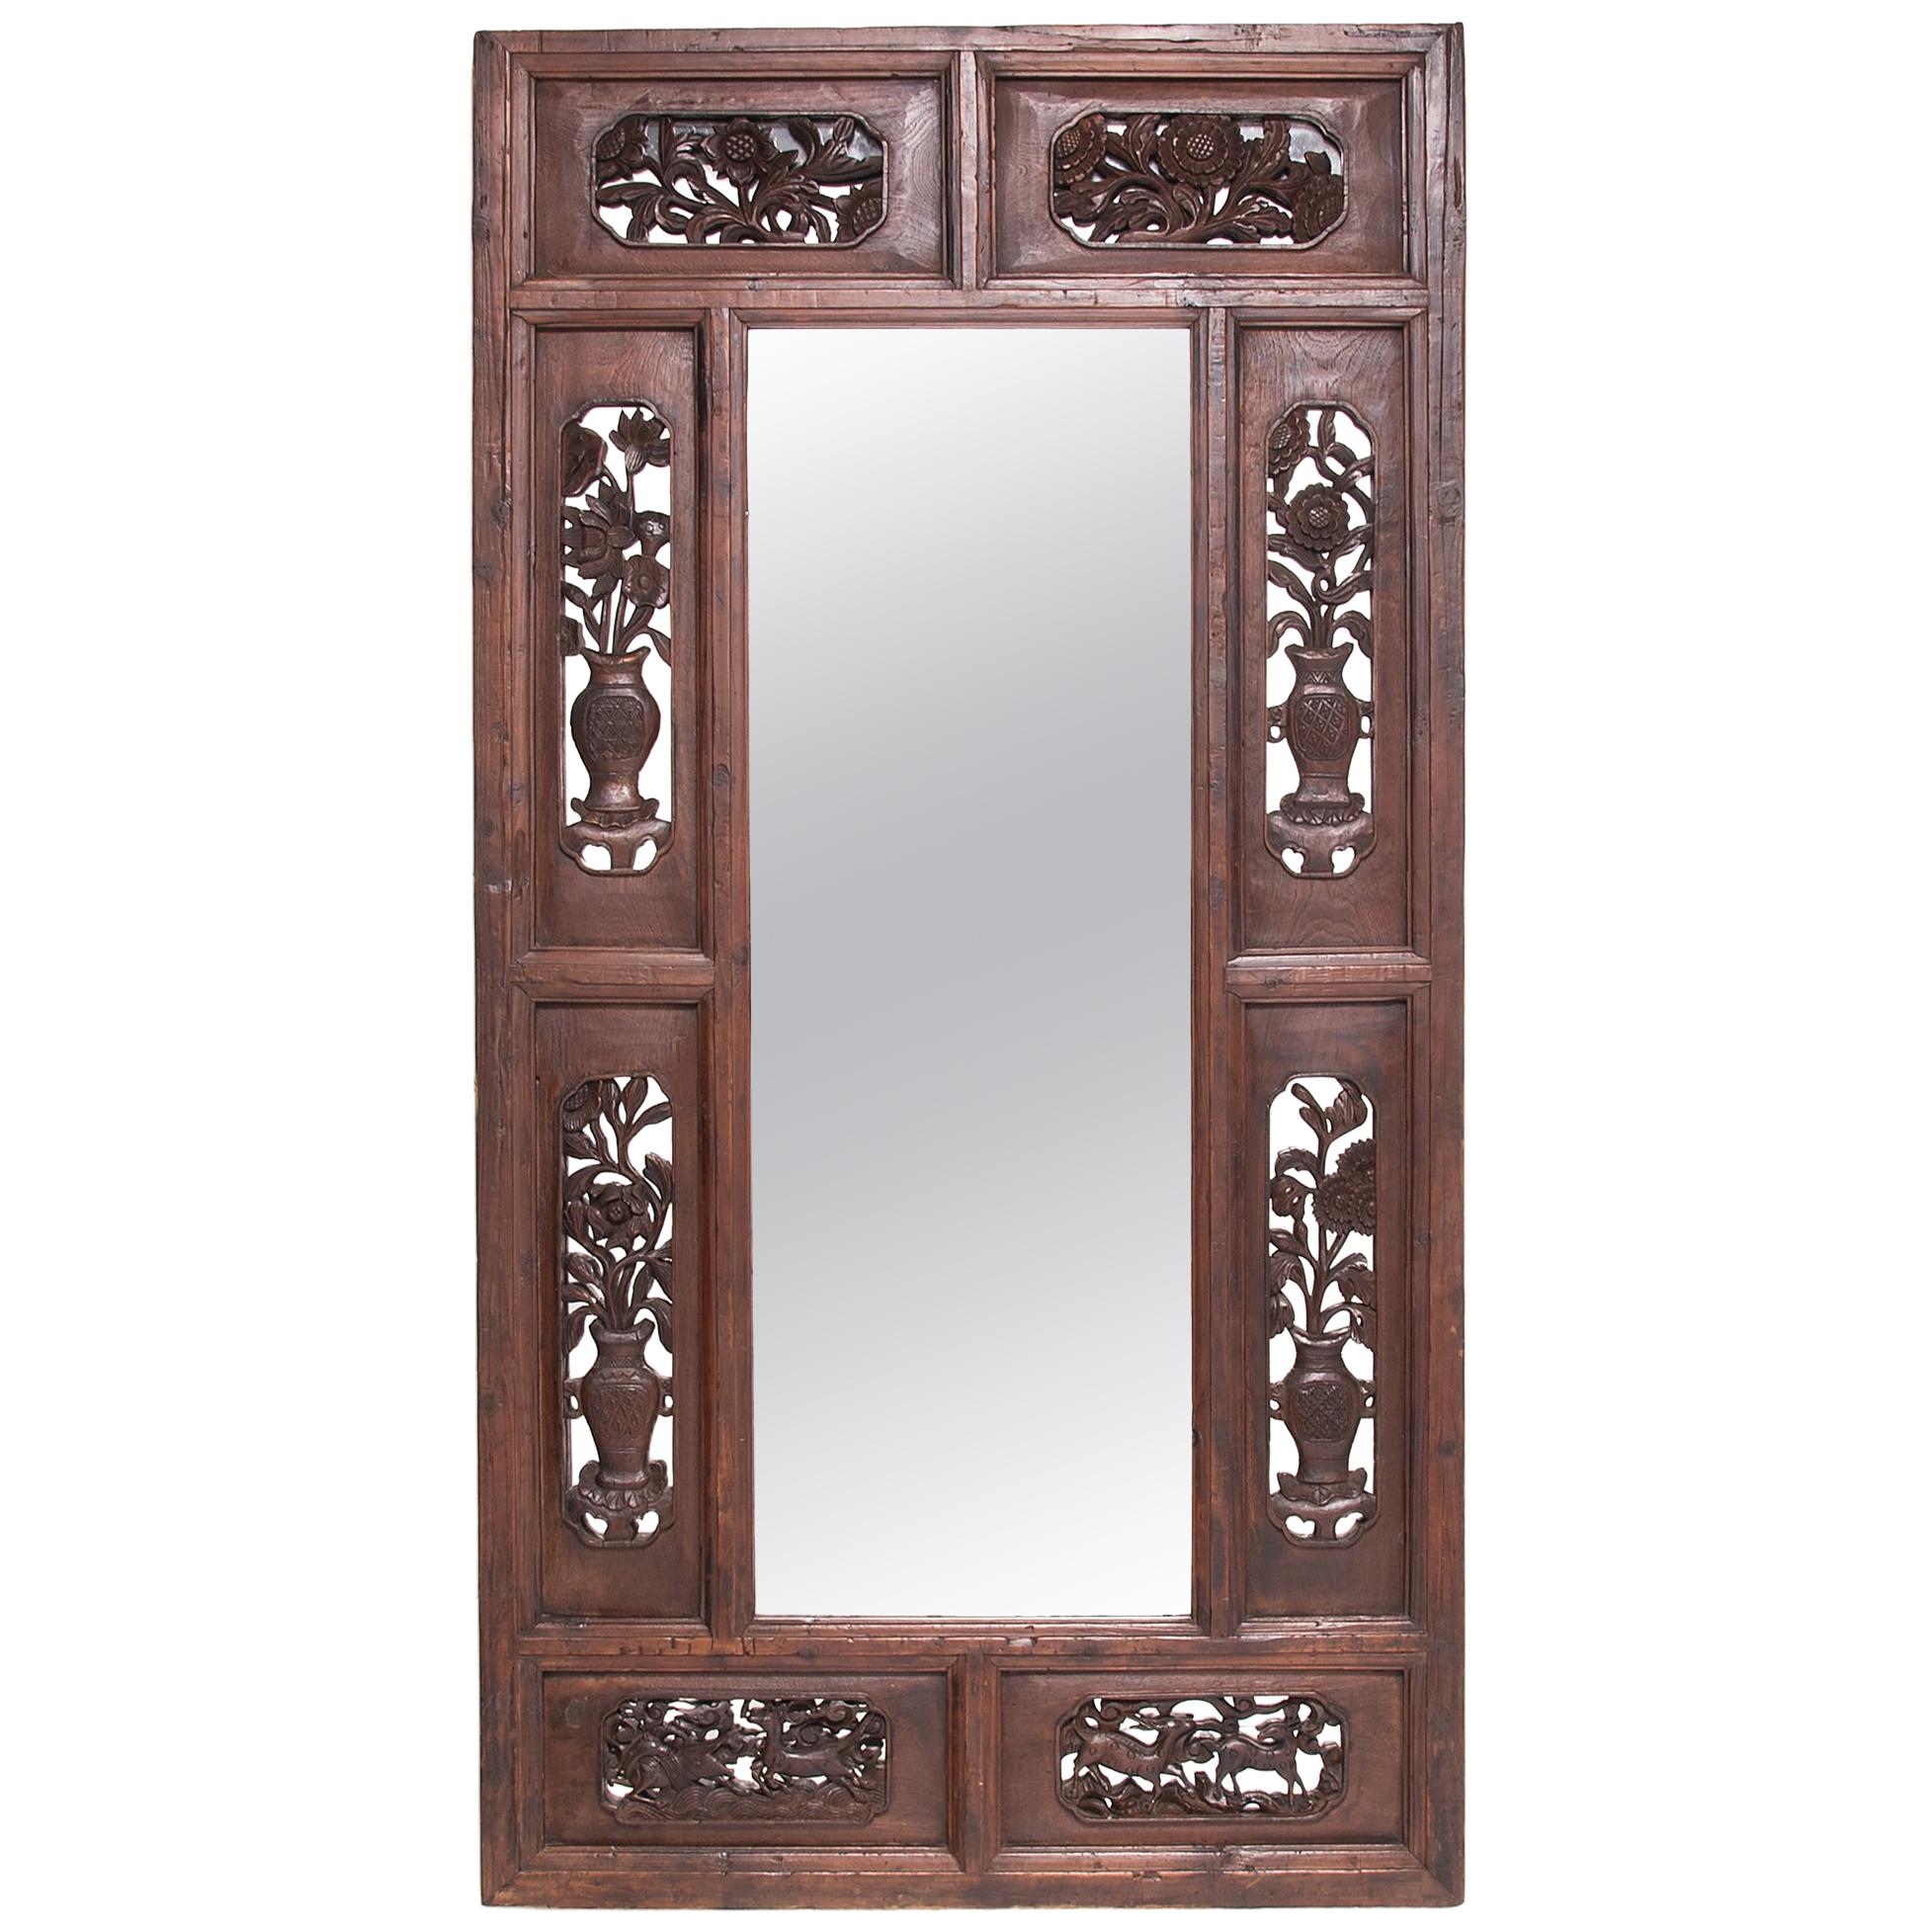 Grand Chinese Floral Carved Mirror, c. 1850 For Sale